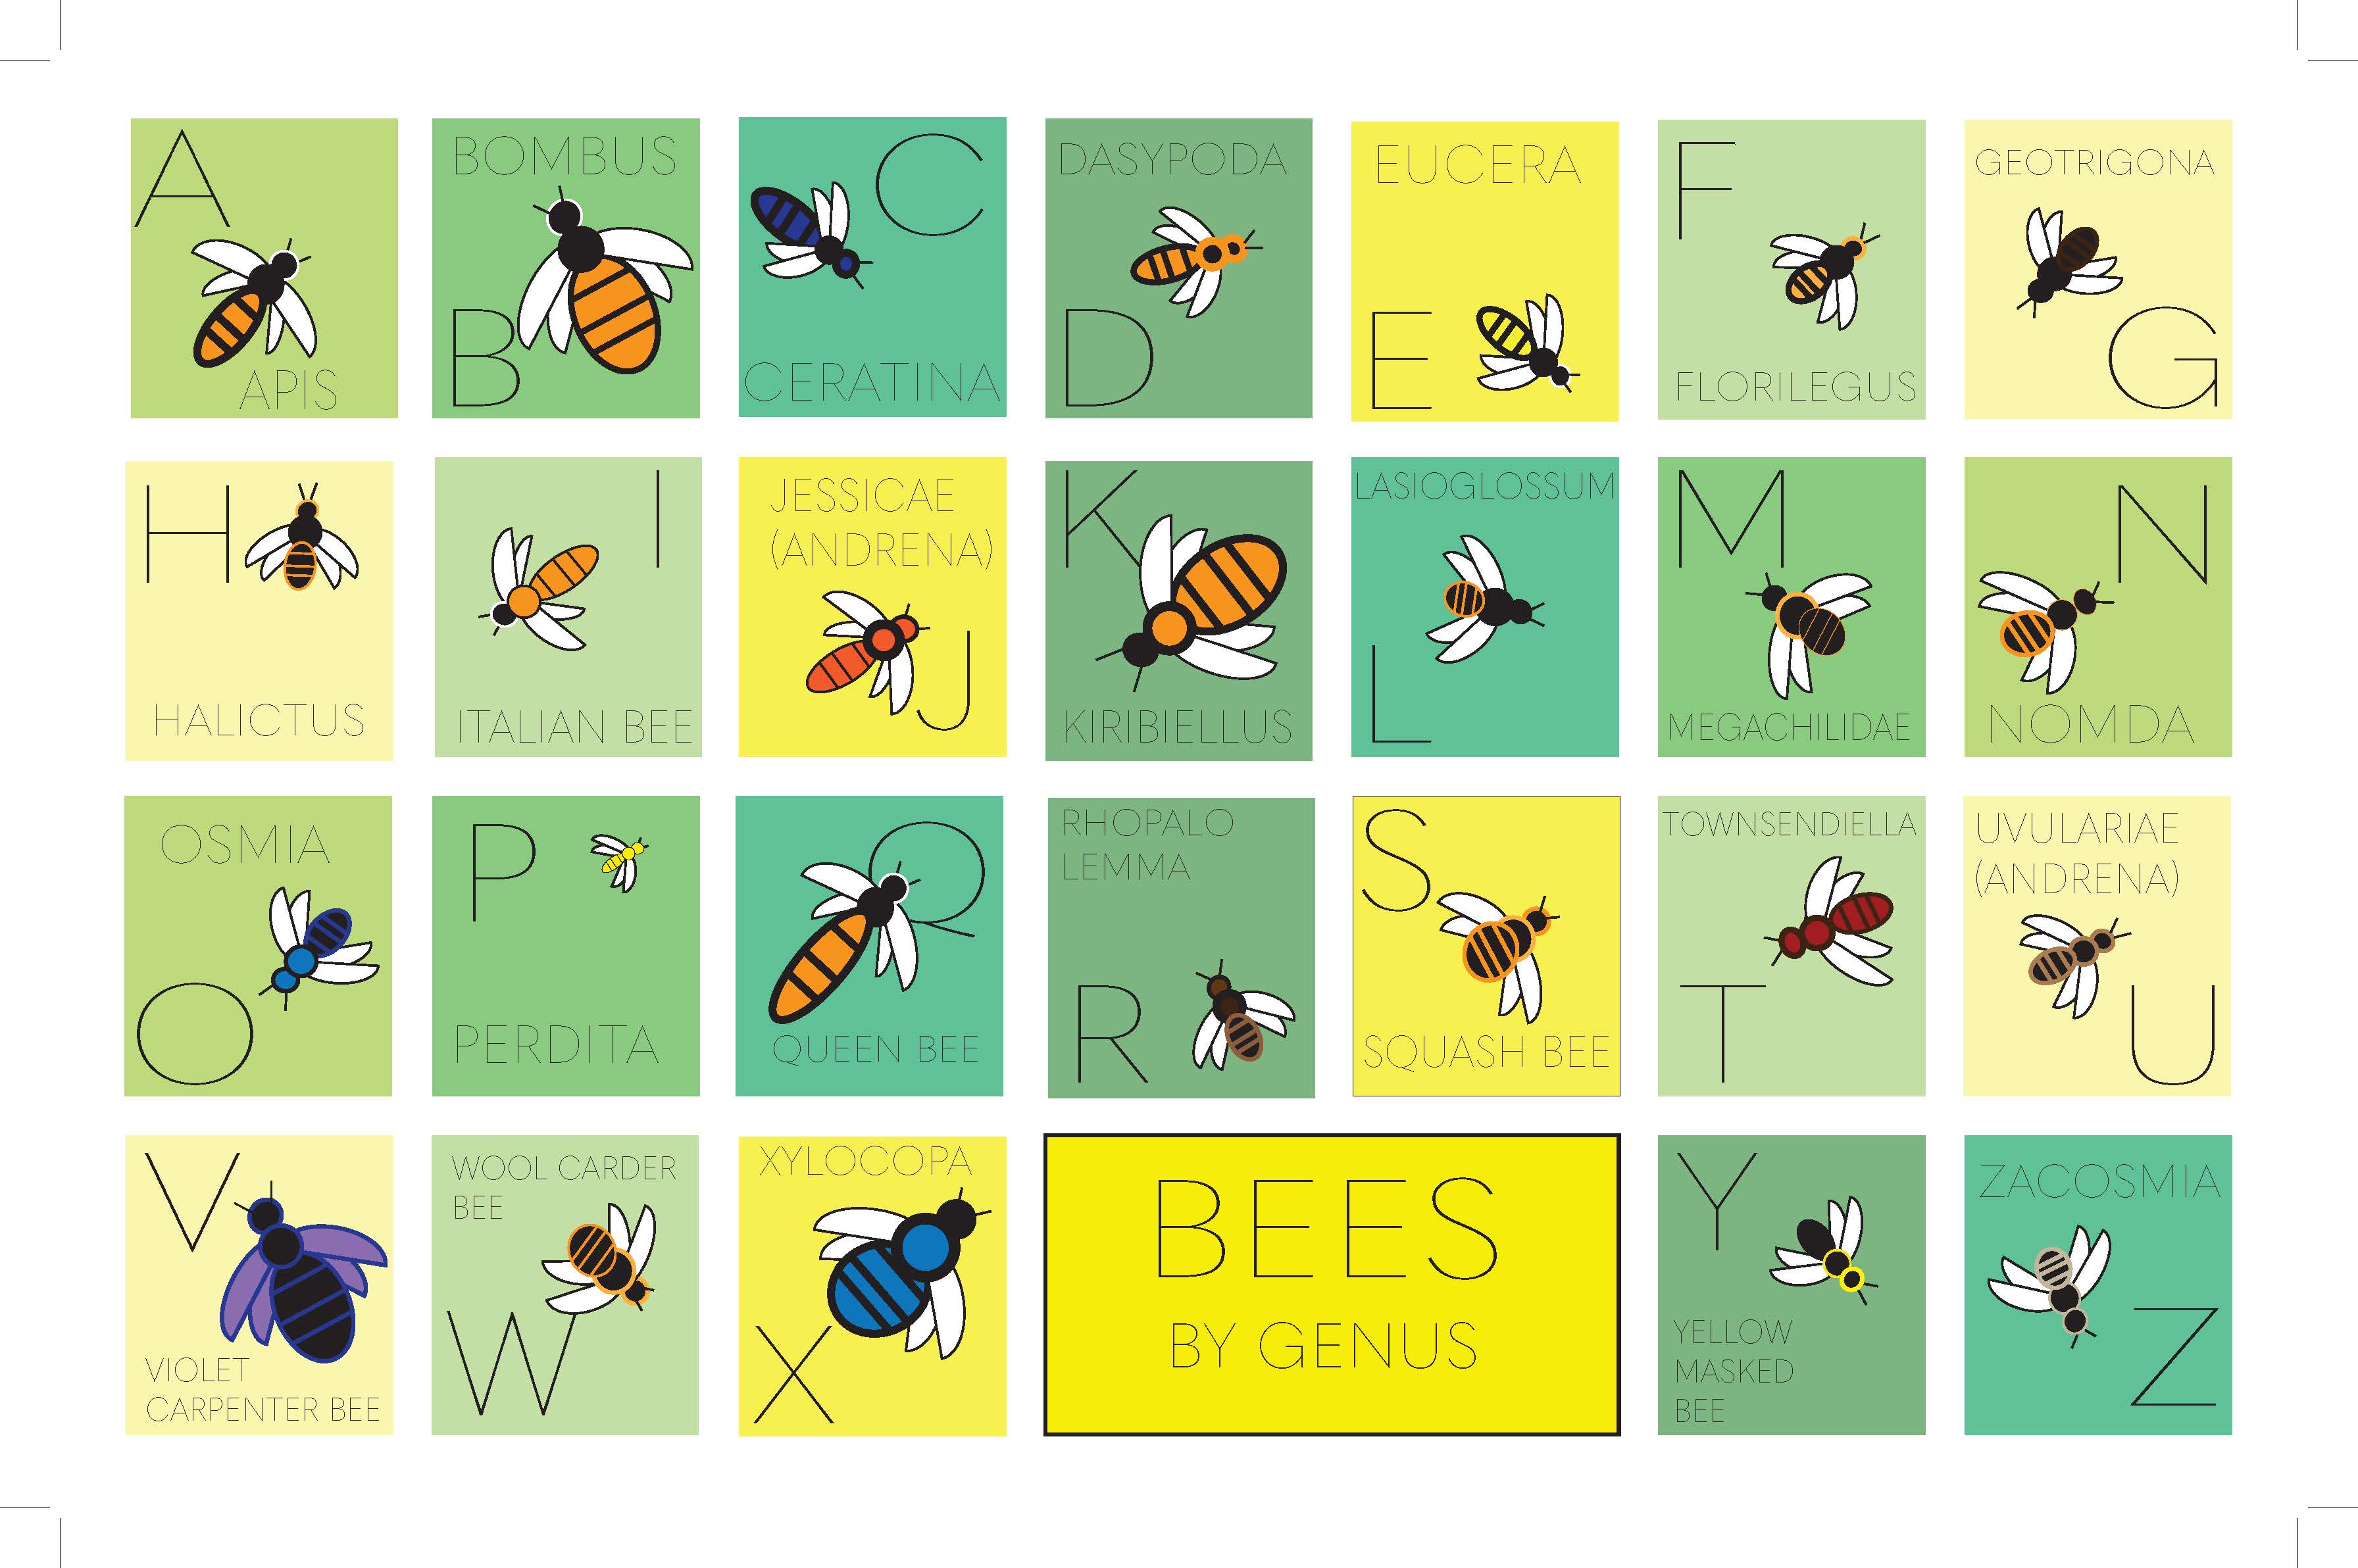 a to z graphic of different bees by genus